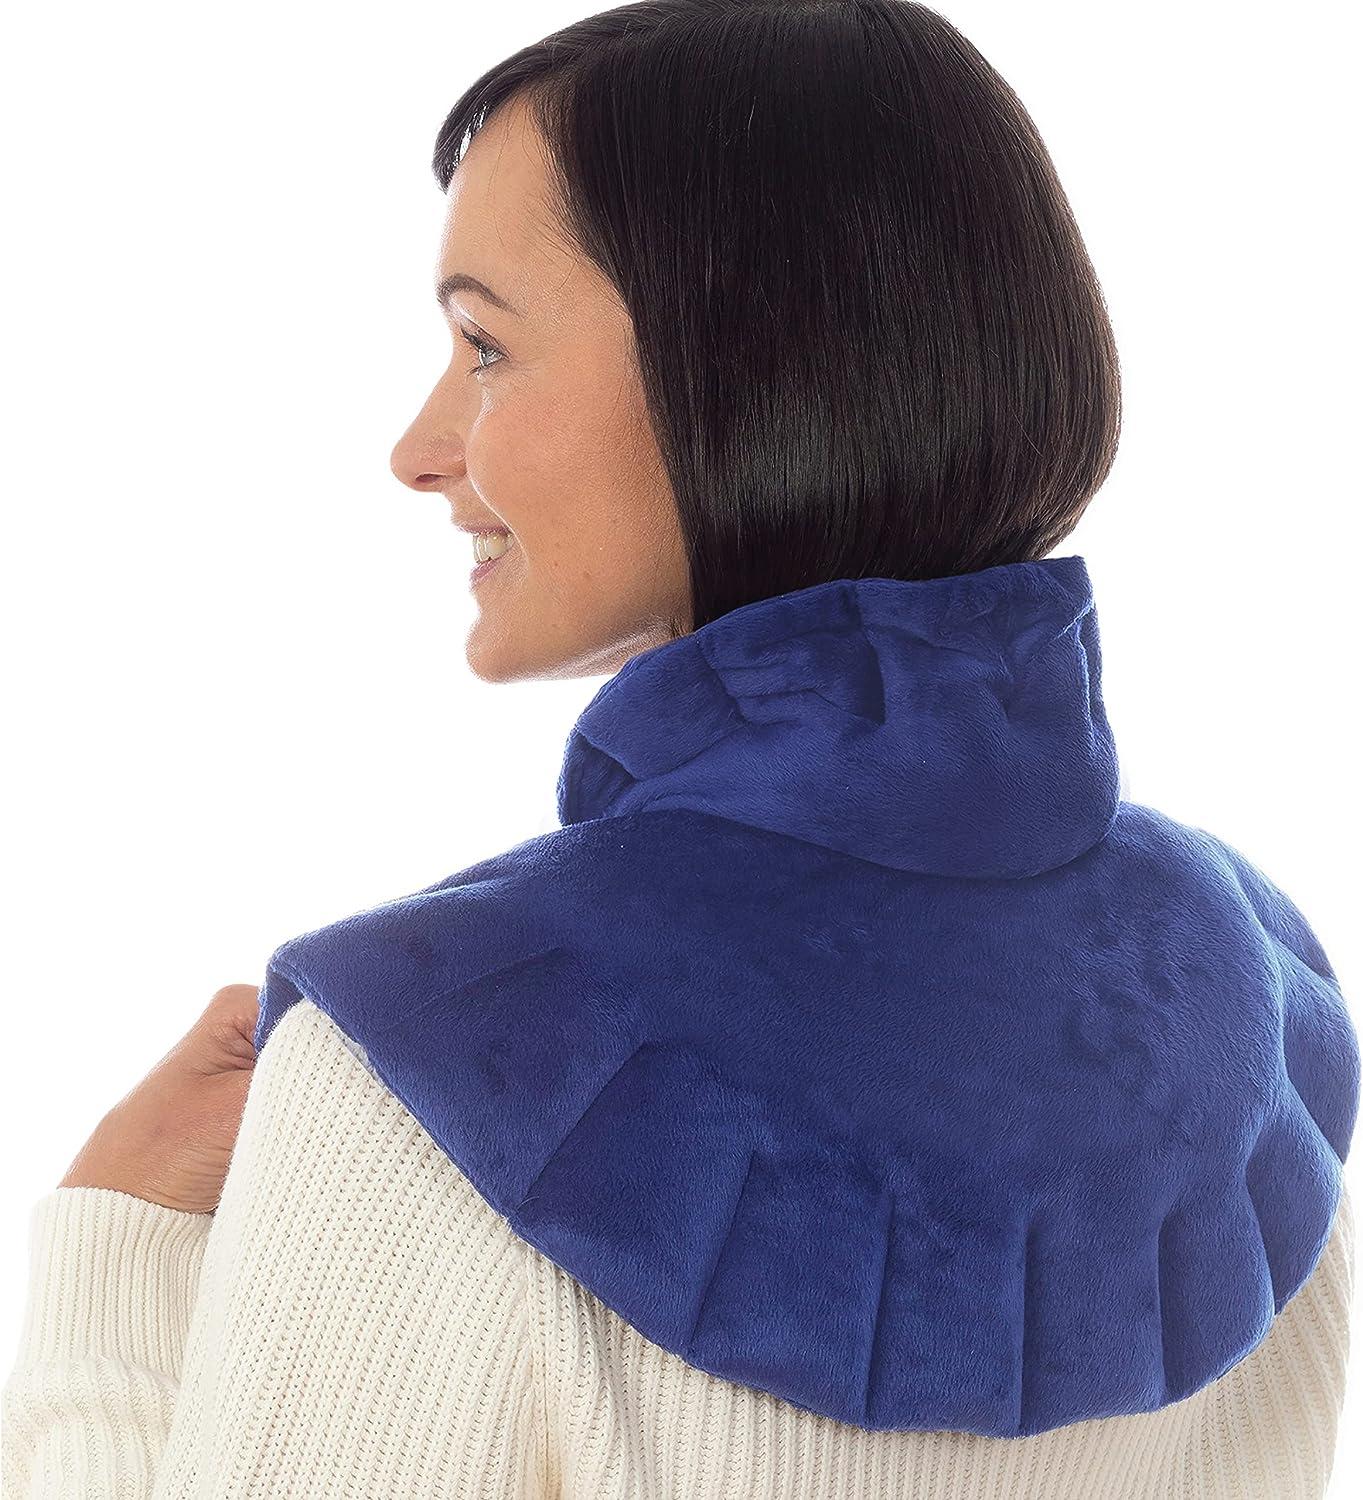 My Heating Pad- Neck & Shoulder Wrap - Natural Heat Therapy - Neck Pain Relief (Blue)